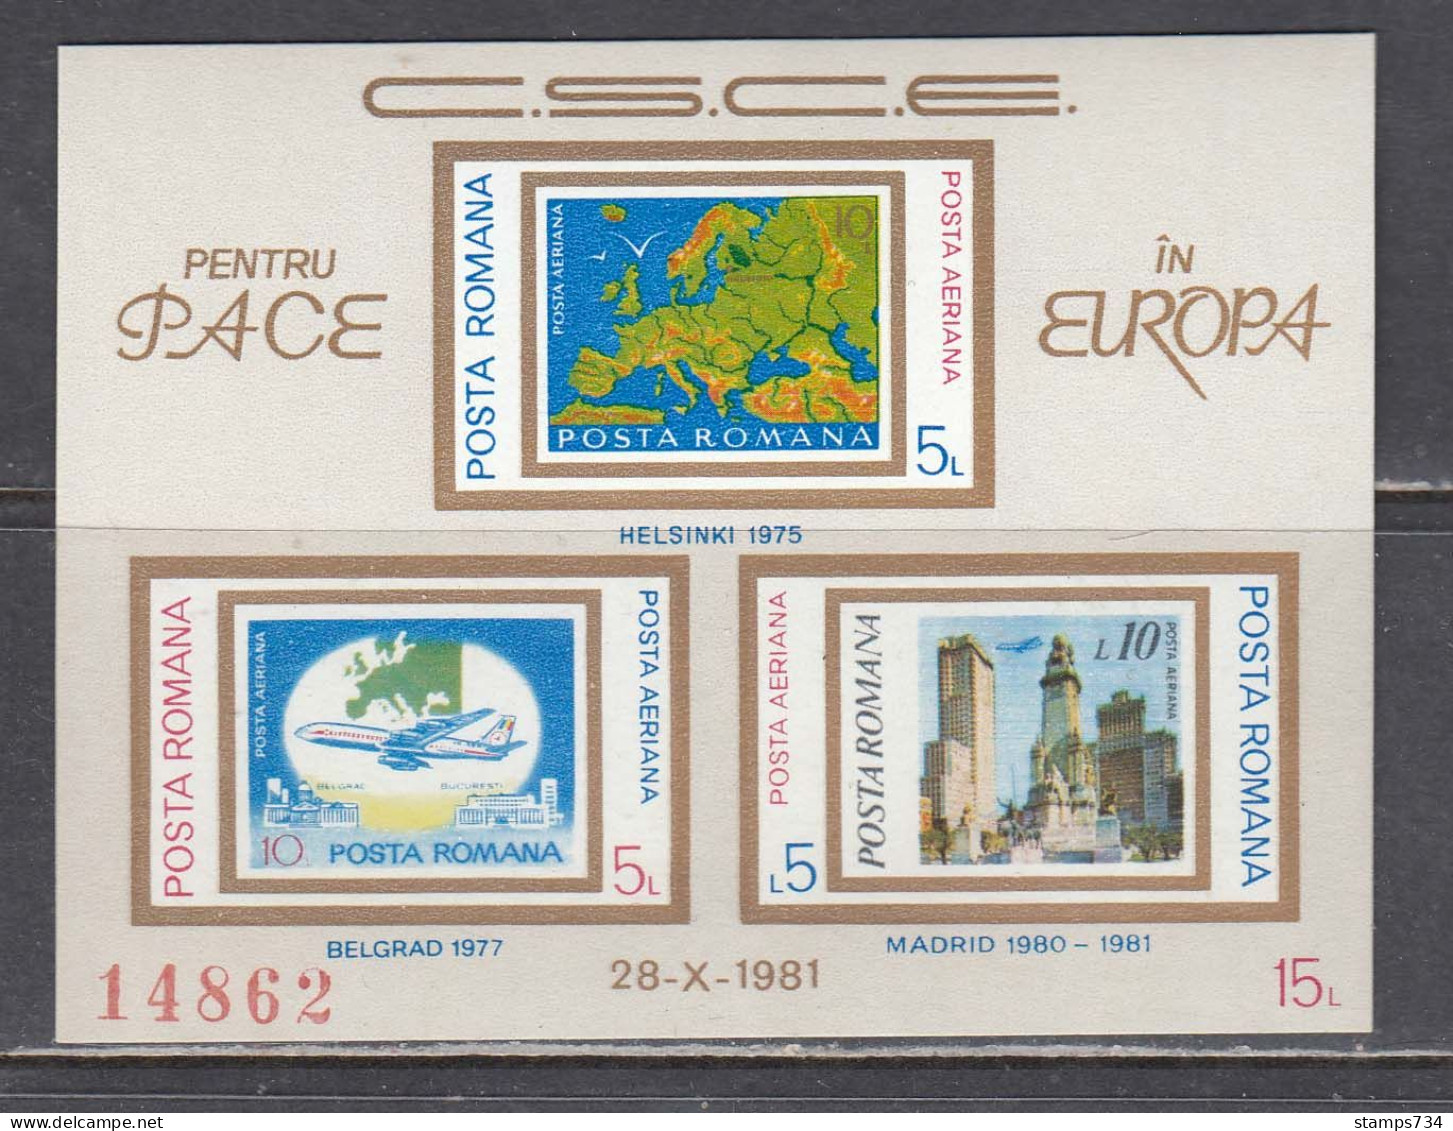 Romania 1981 - Conference On Security And Cooperation In Europe (CSCE), Madrid, Mi-Nr. Bl. 183, MNH** - Ongebruikt